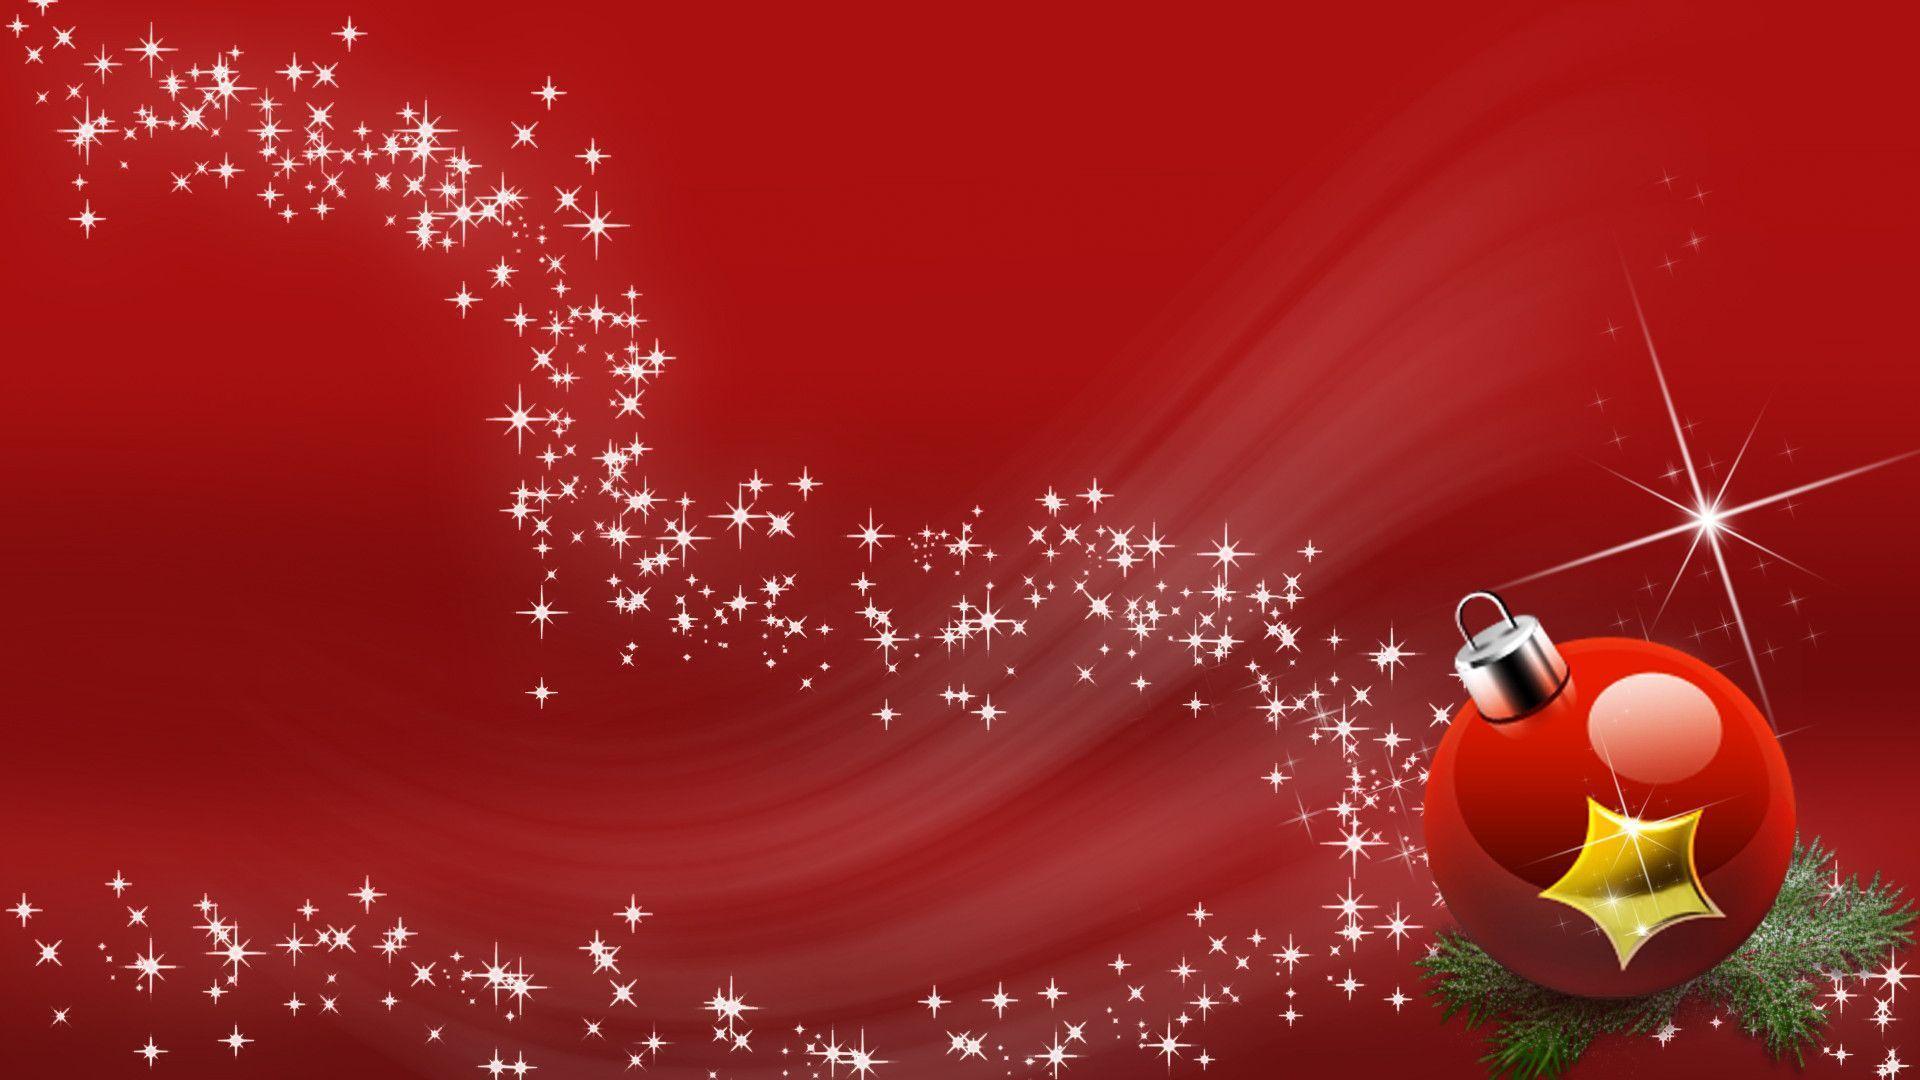 Red Christmas Wallpaper 67 pictures